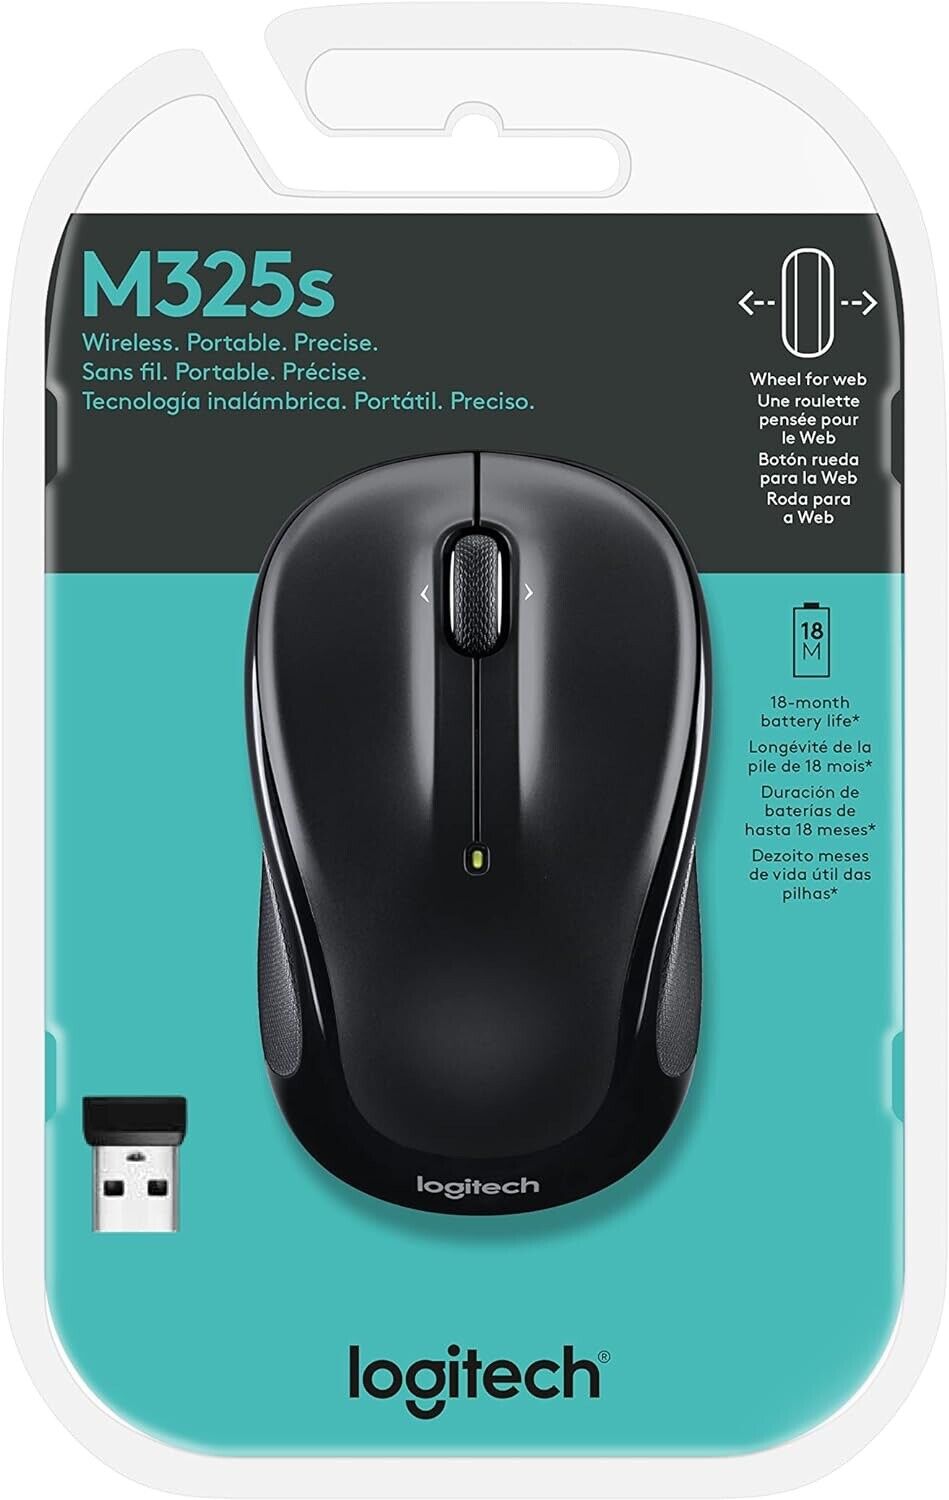 Logitech Wireless Mouse M325s (BRAND NEW & FACTORY SEALED FROM THE MANUFACTURER)